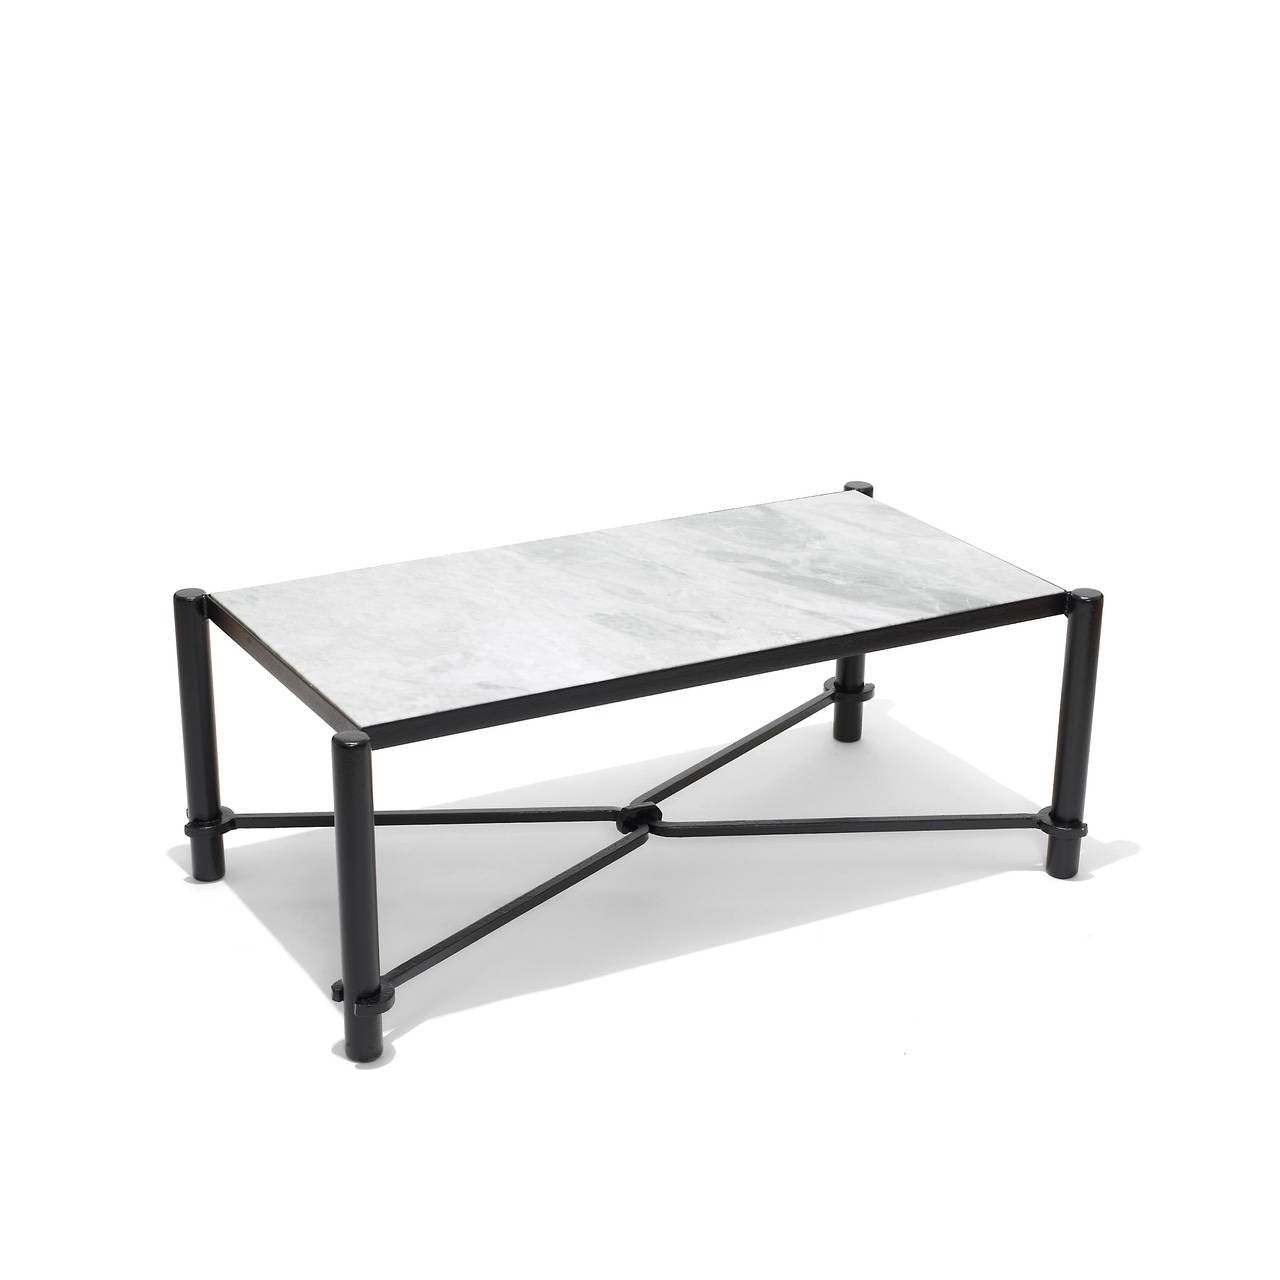 Mid-Century Modern Coffee Table with Horse-Tack Styling in Iron and Marble by Jacques Adnet For Sale